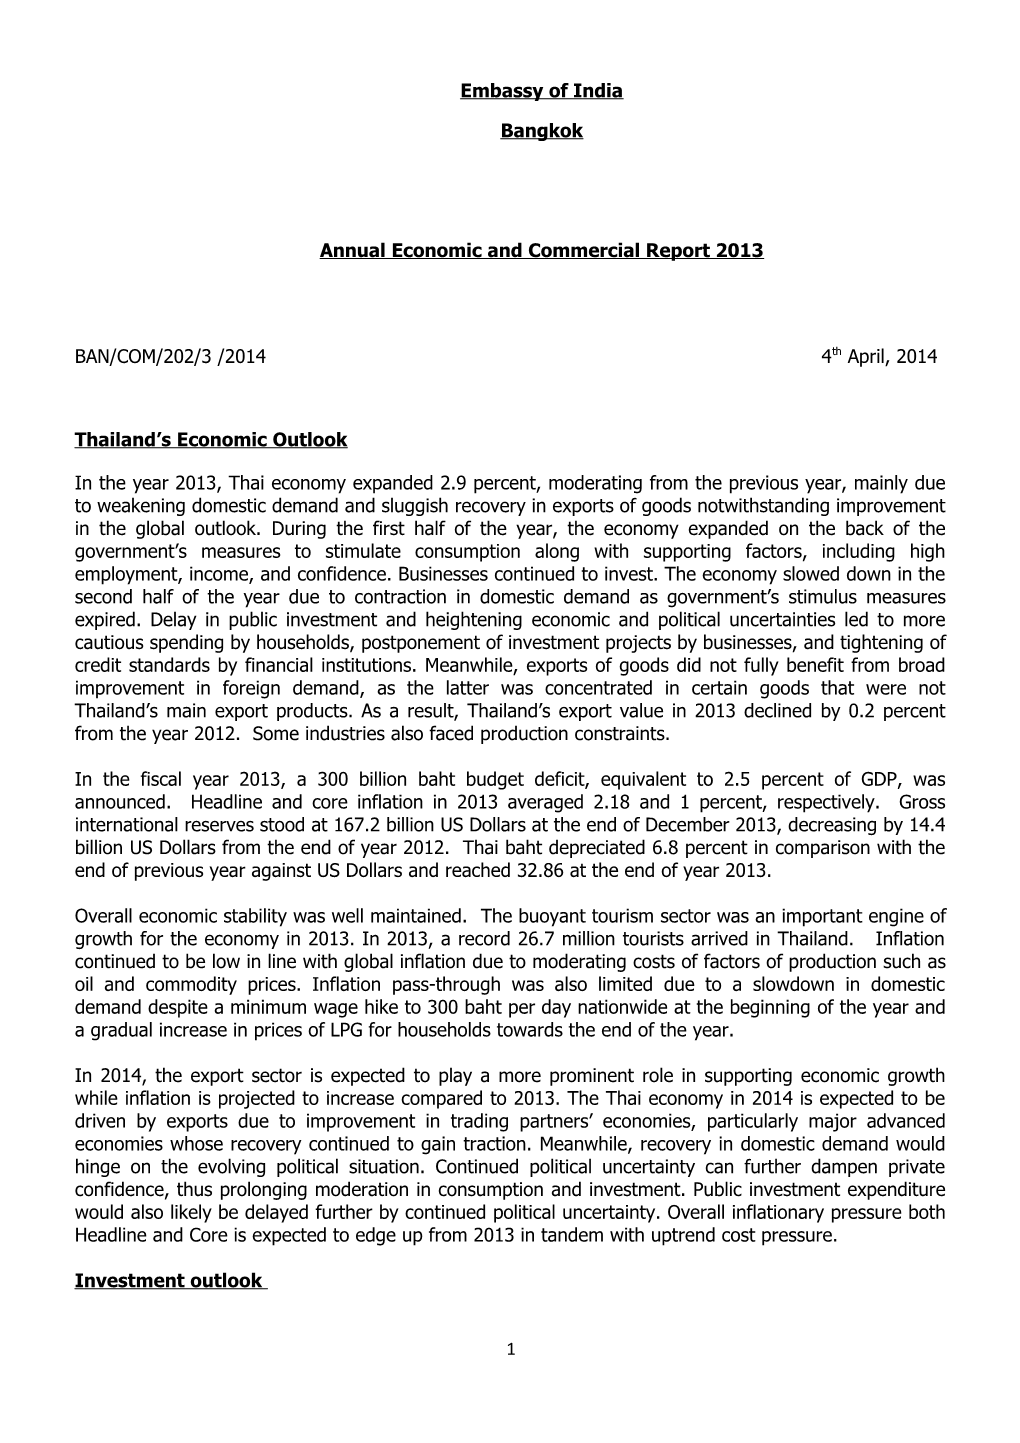 Annual Economic and Commercial Report 2013